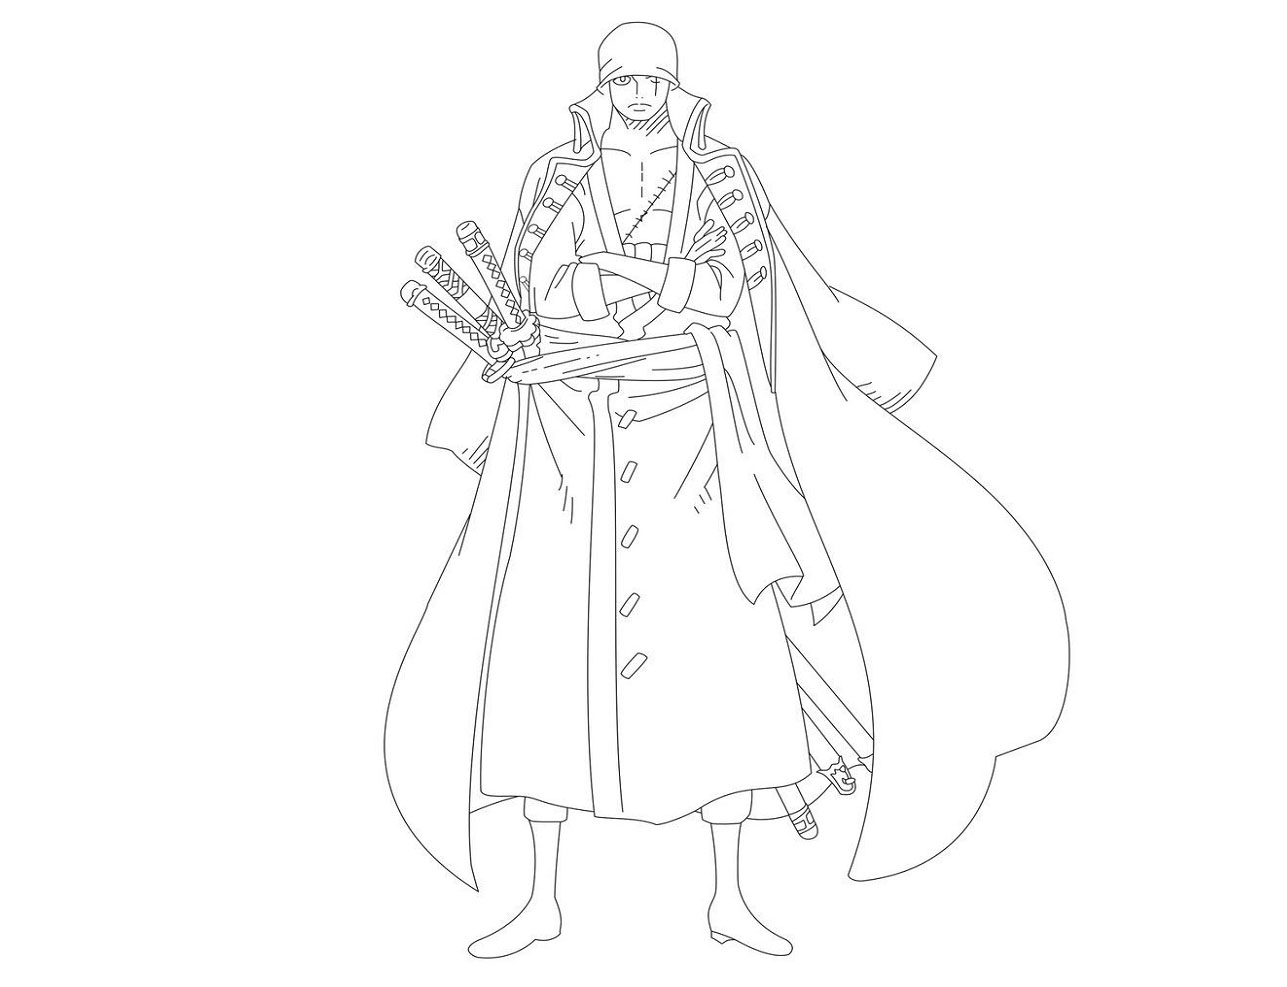 Zoro coloring pages